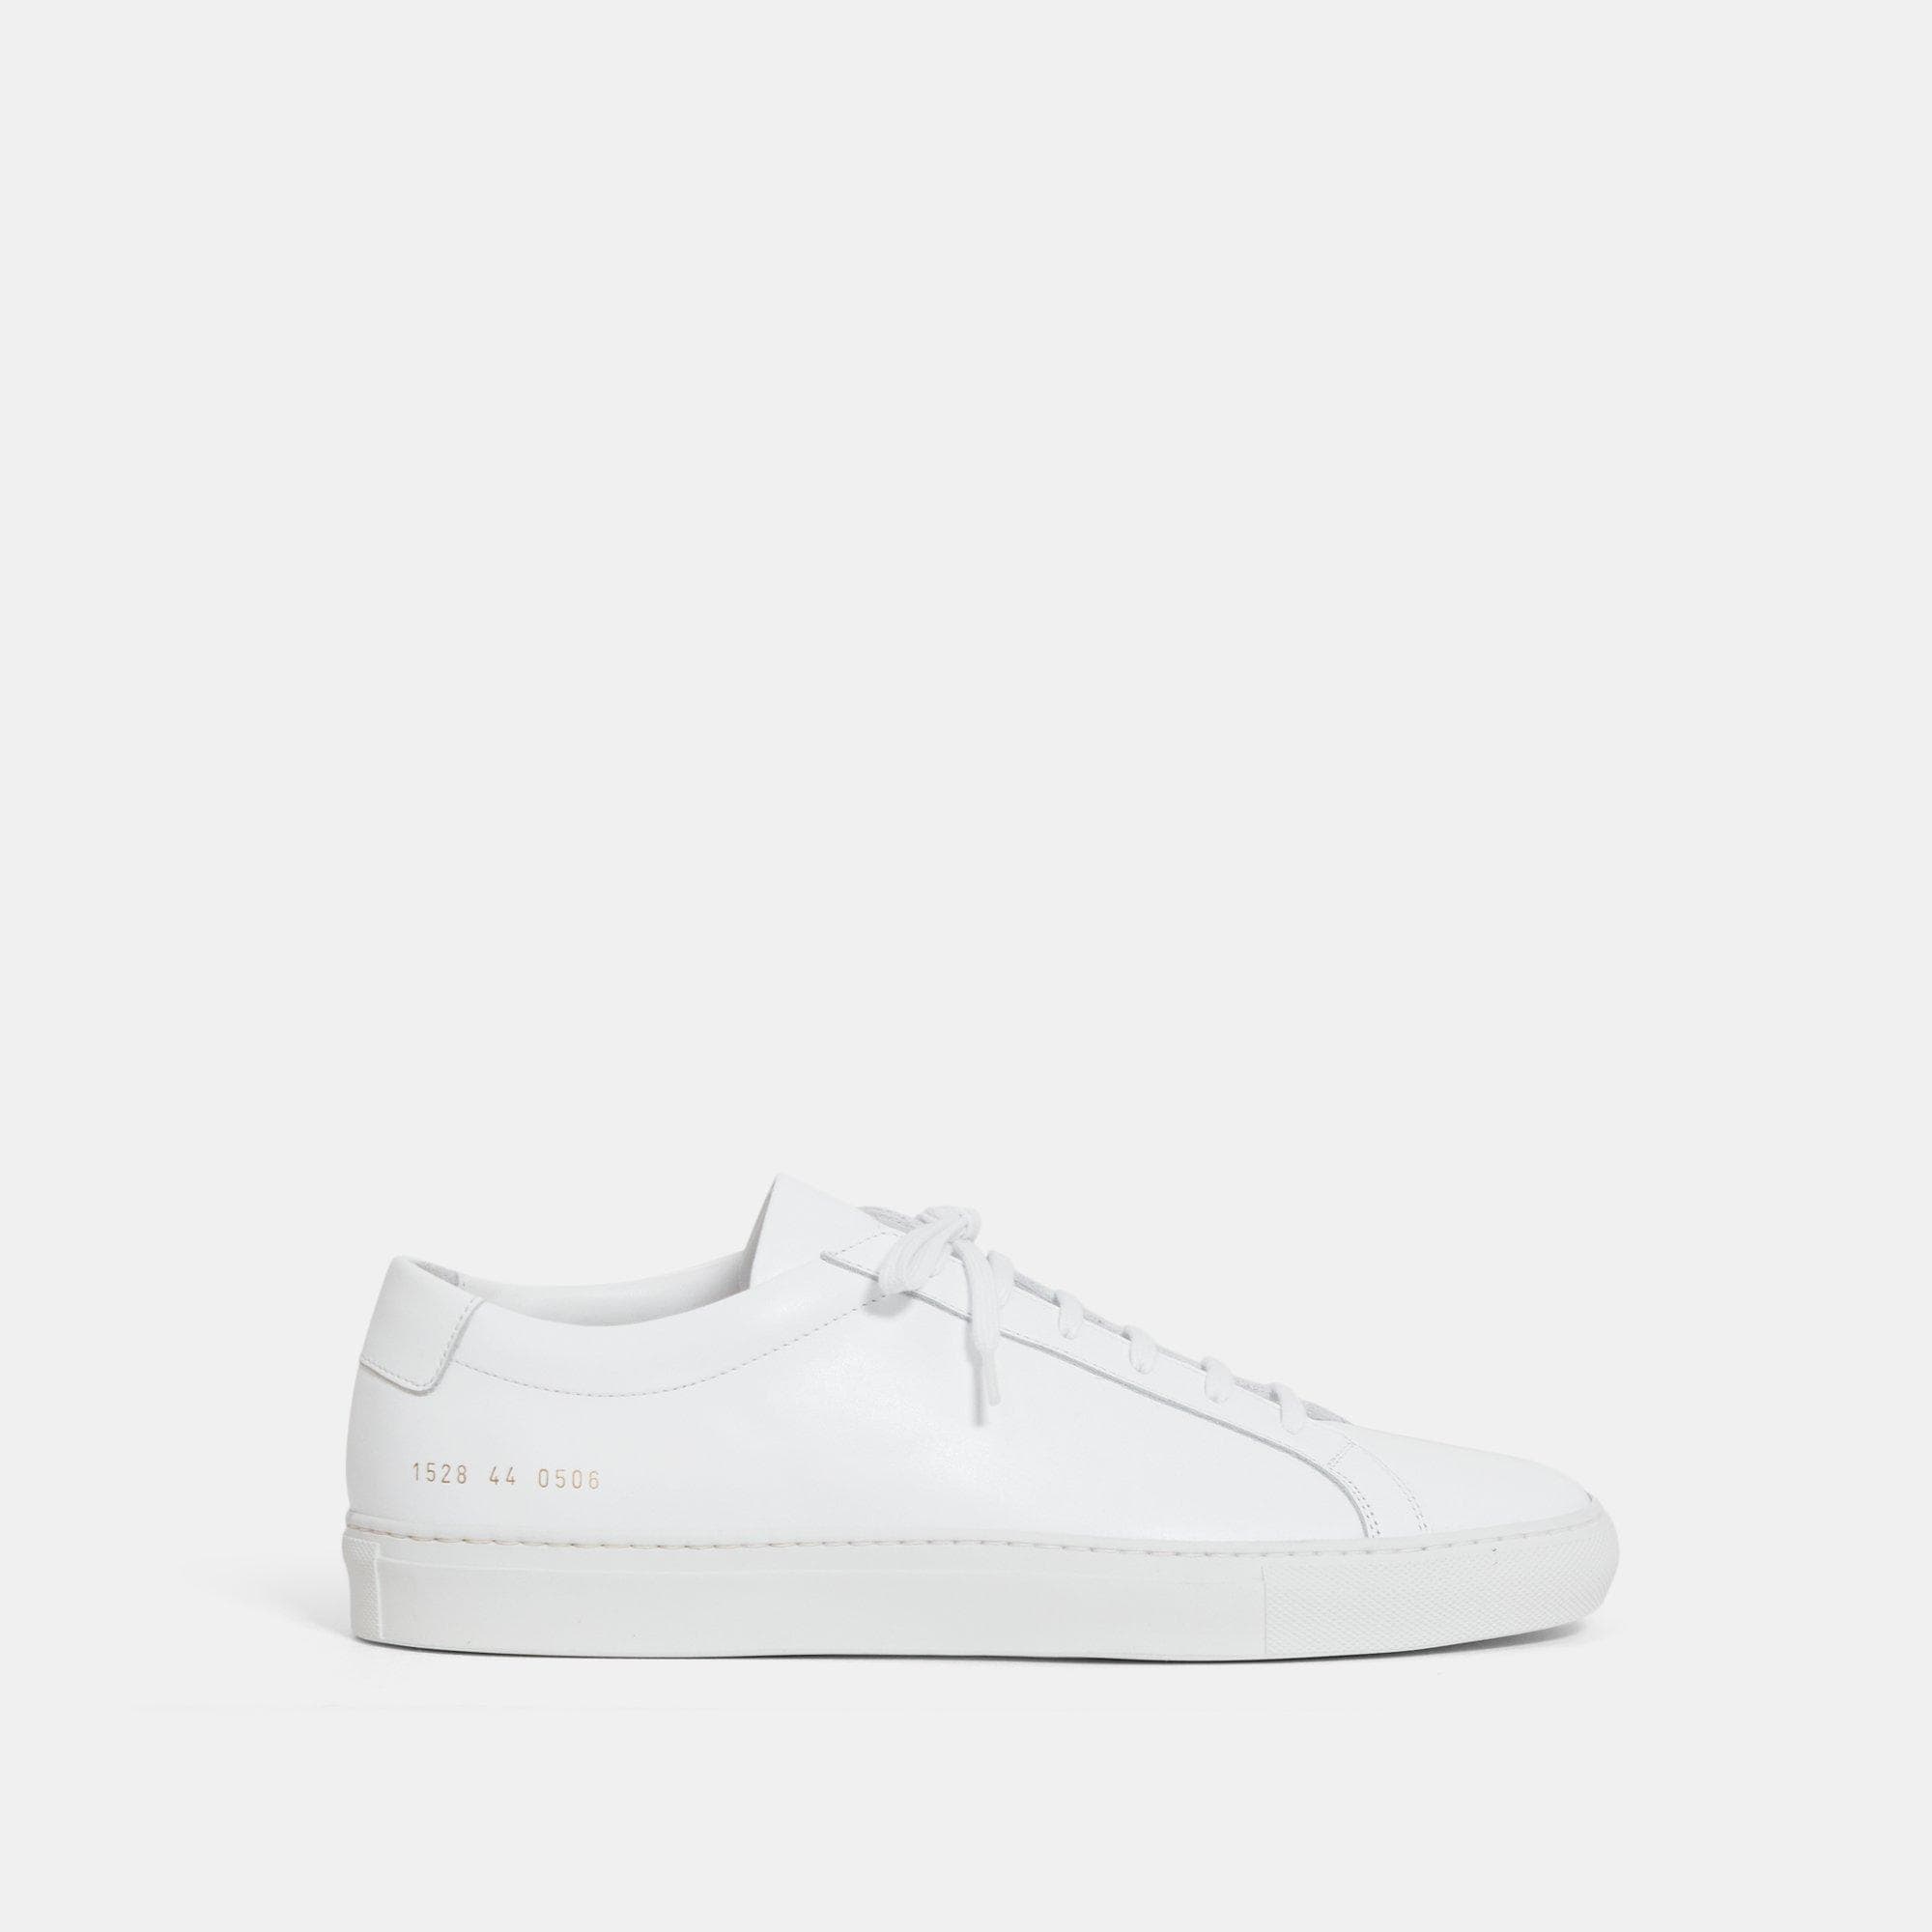 Blue Common Projects Men's Original Achilles Sneakers | Theory Outlet